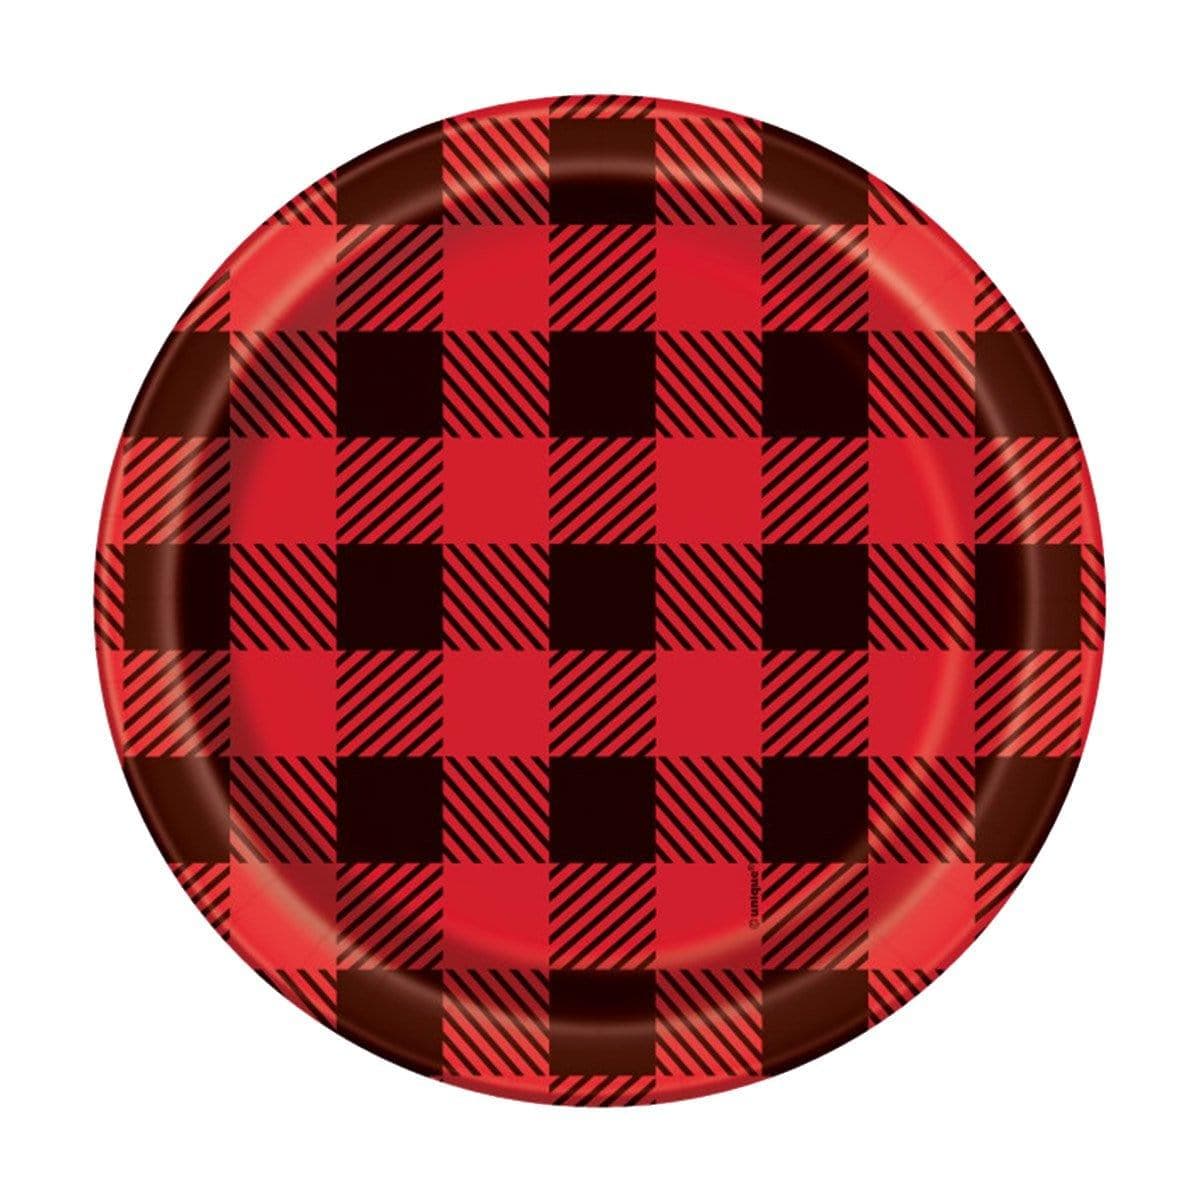 Buy Everyday Entertaining Lumberjack Paper Plates 7 Inches, 8 per Package sold at Party Expert